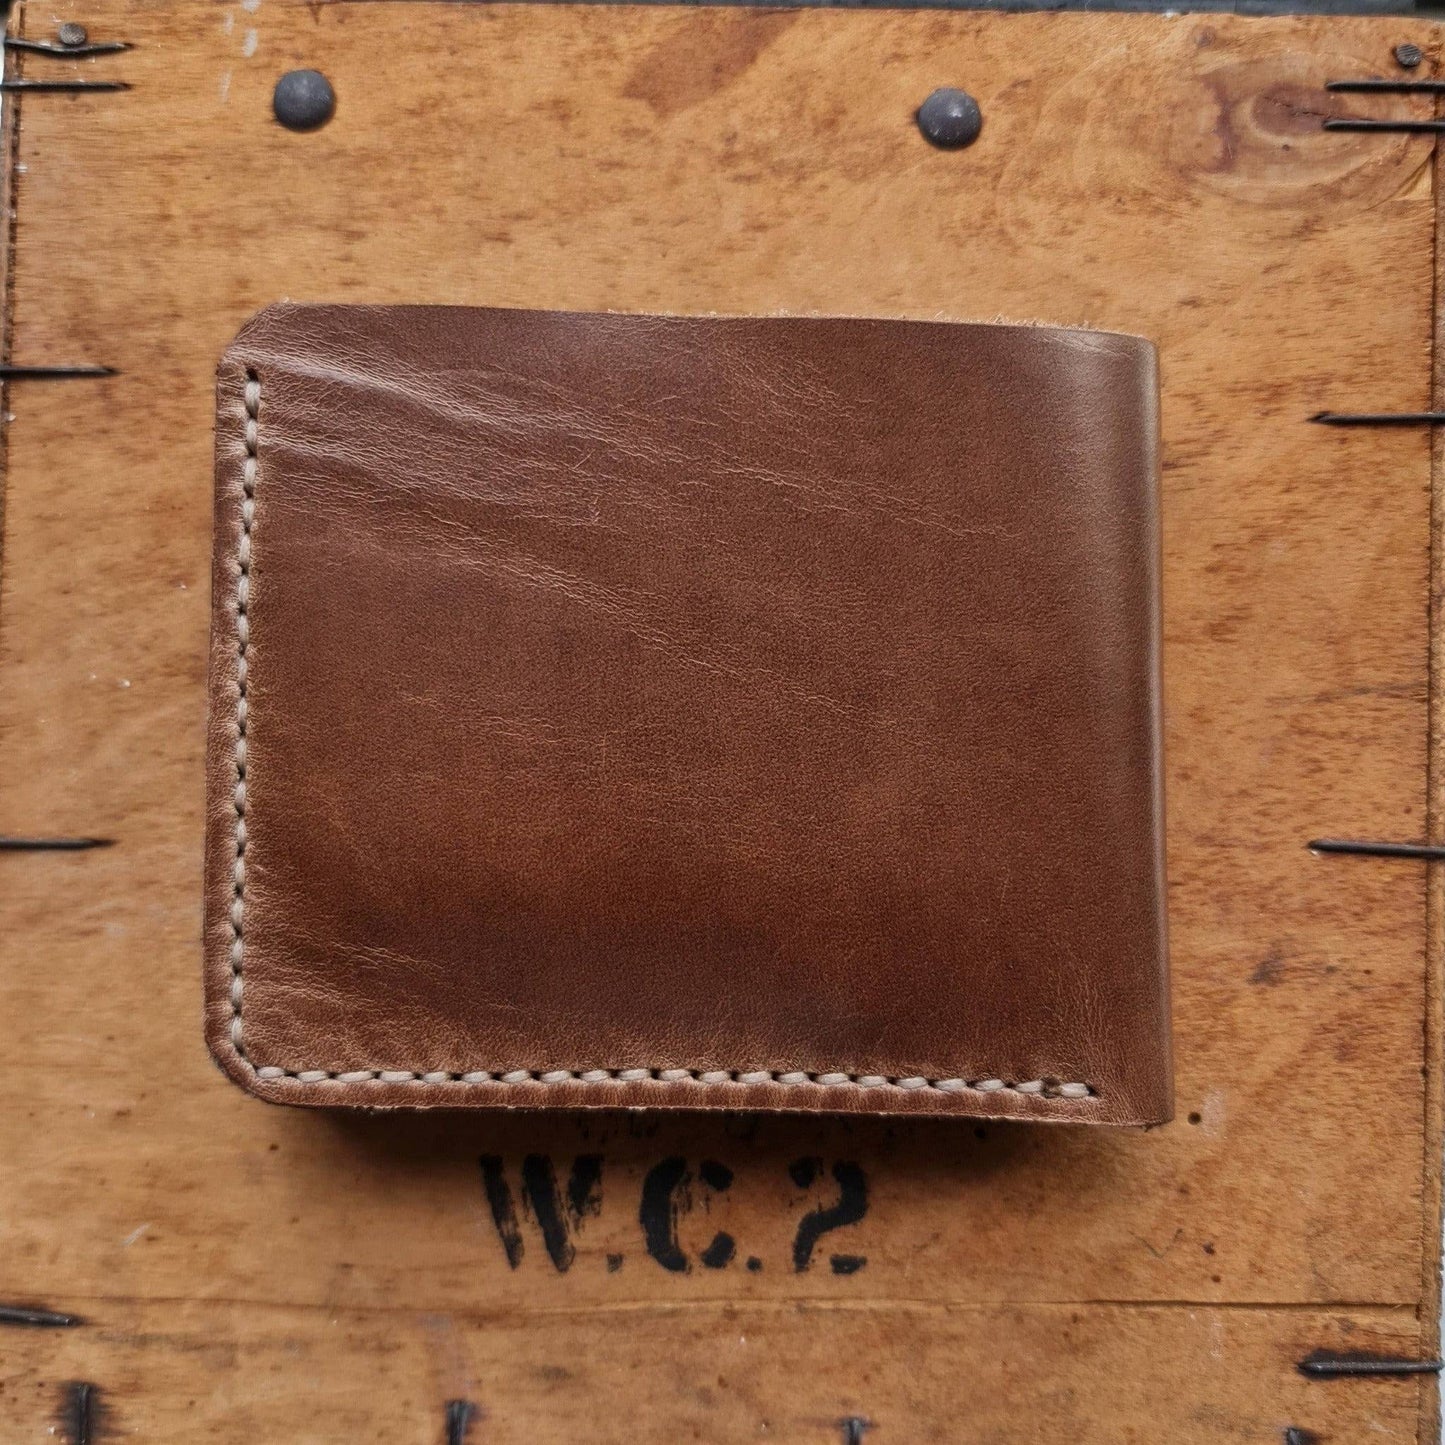 No. 2 Frontiersman Leather Bifold Wallet, Horween Natural Chromexcel Leather, Back